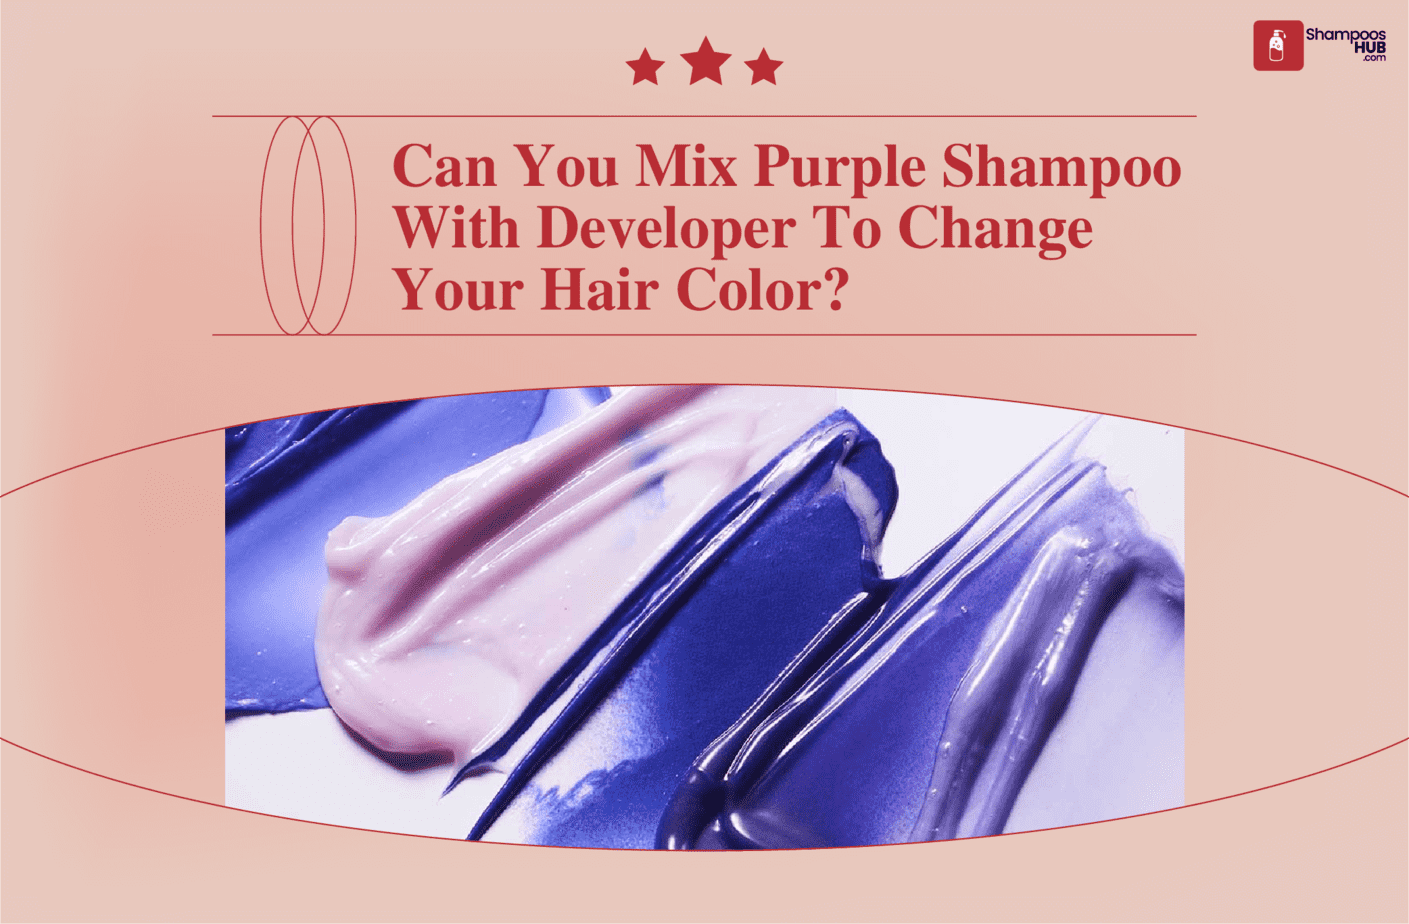 Can You Mix Purple Shampoo With Developer?